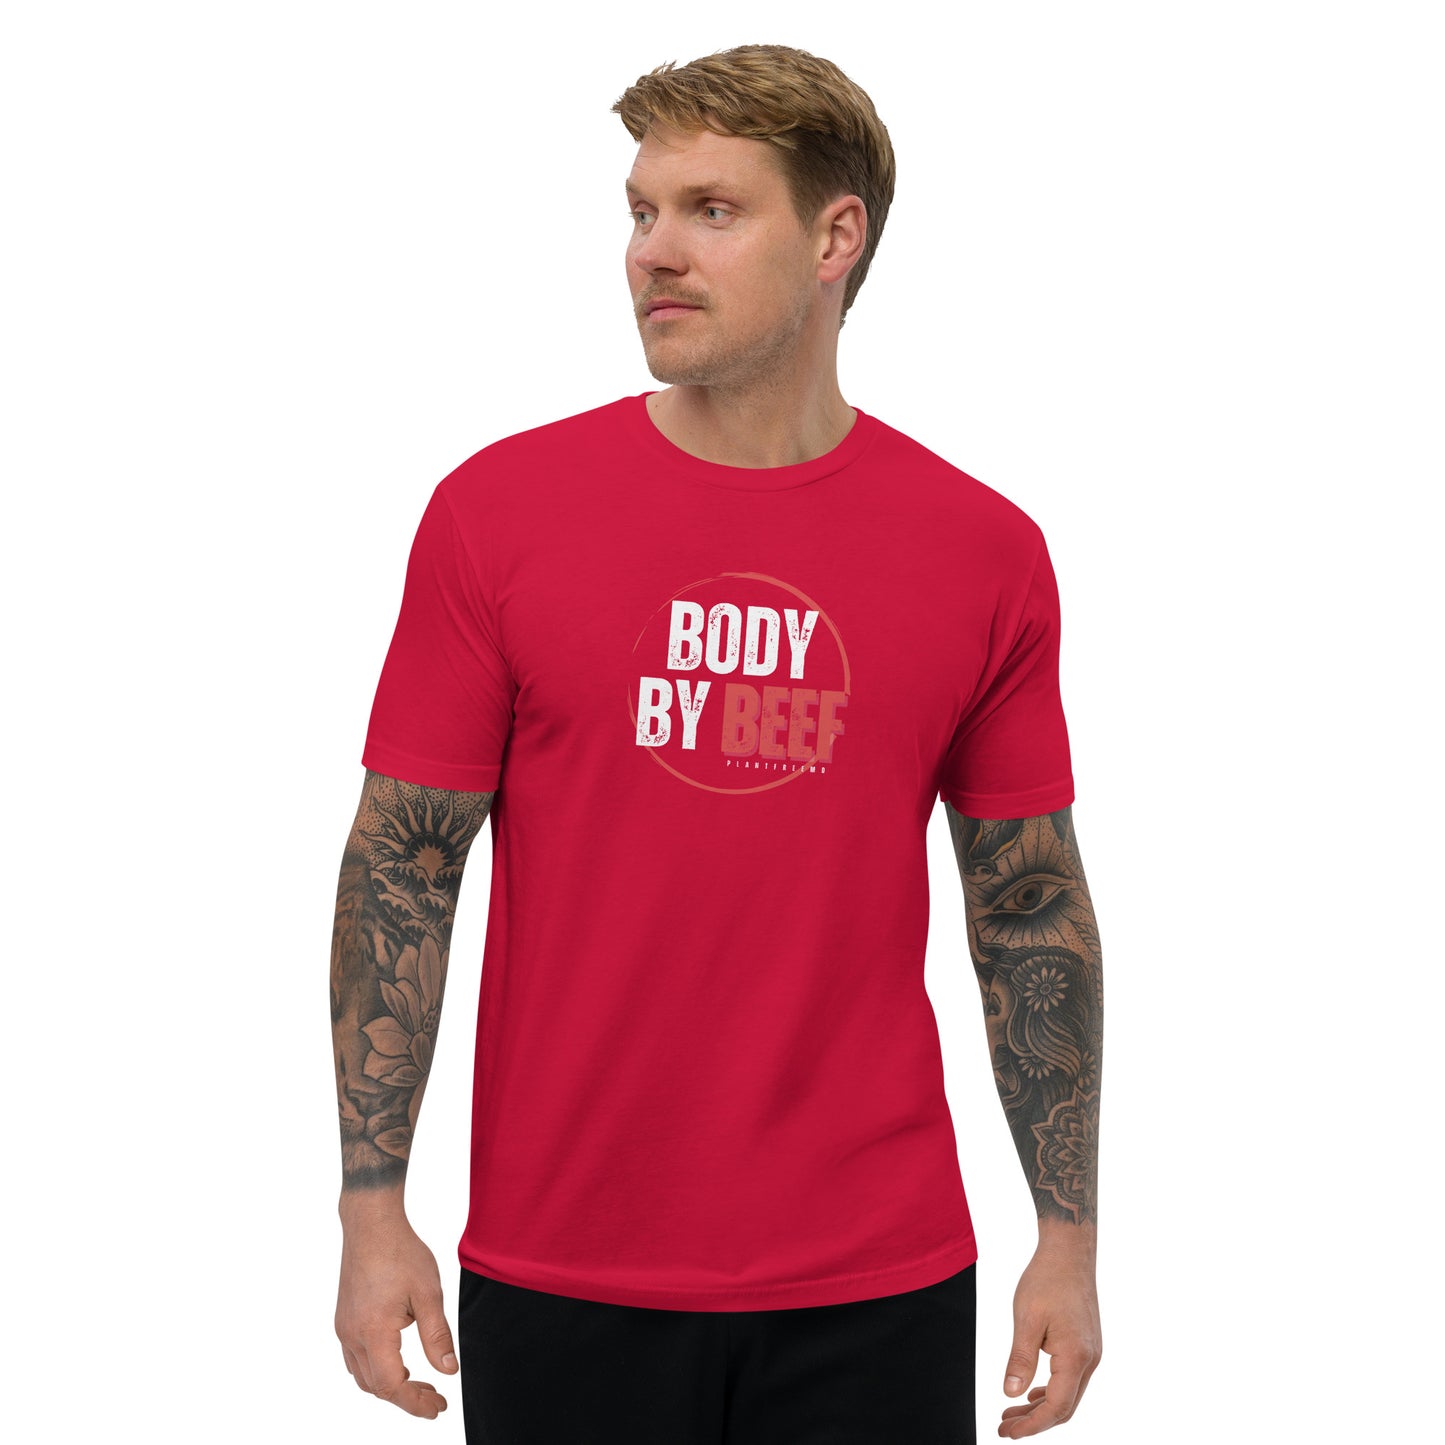 Body By Beef Men's Fitted T-shirt